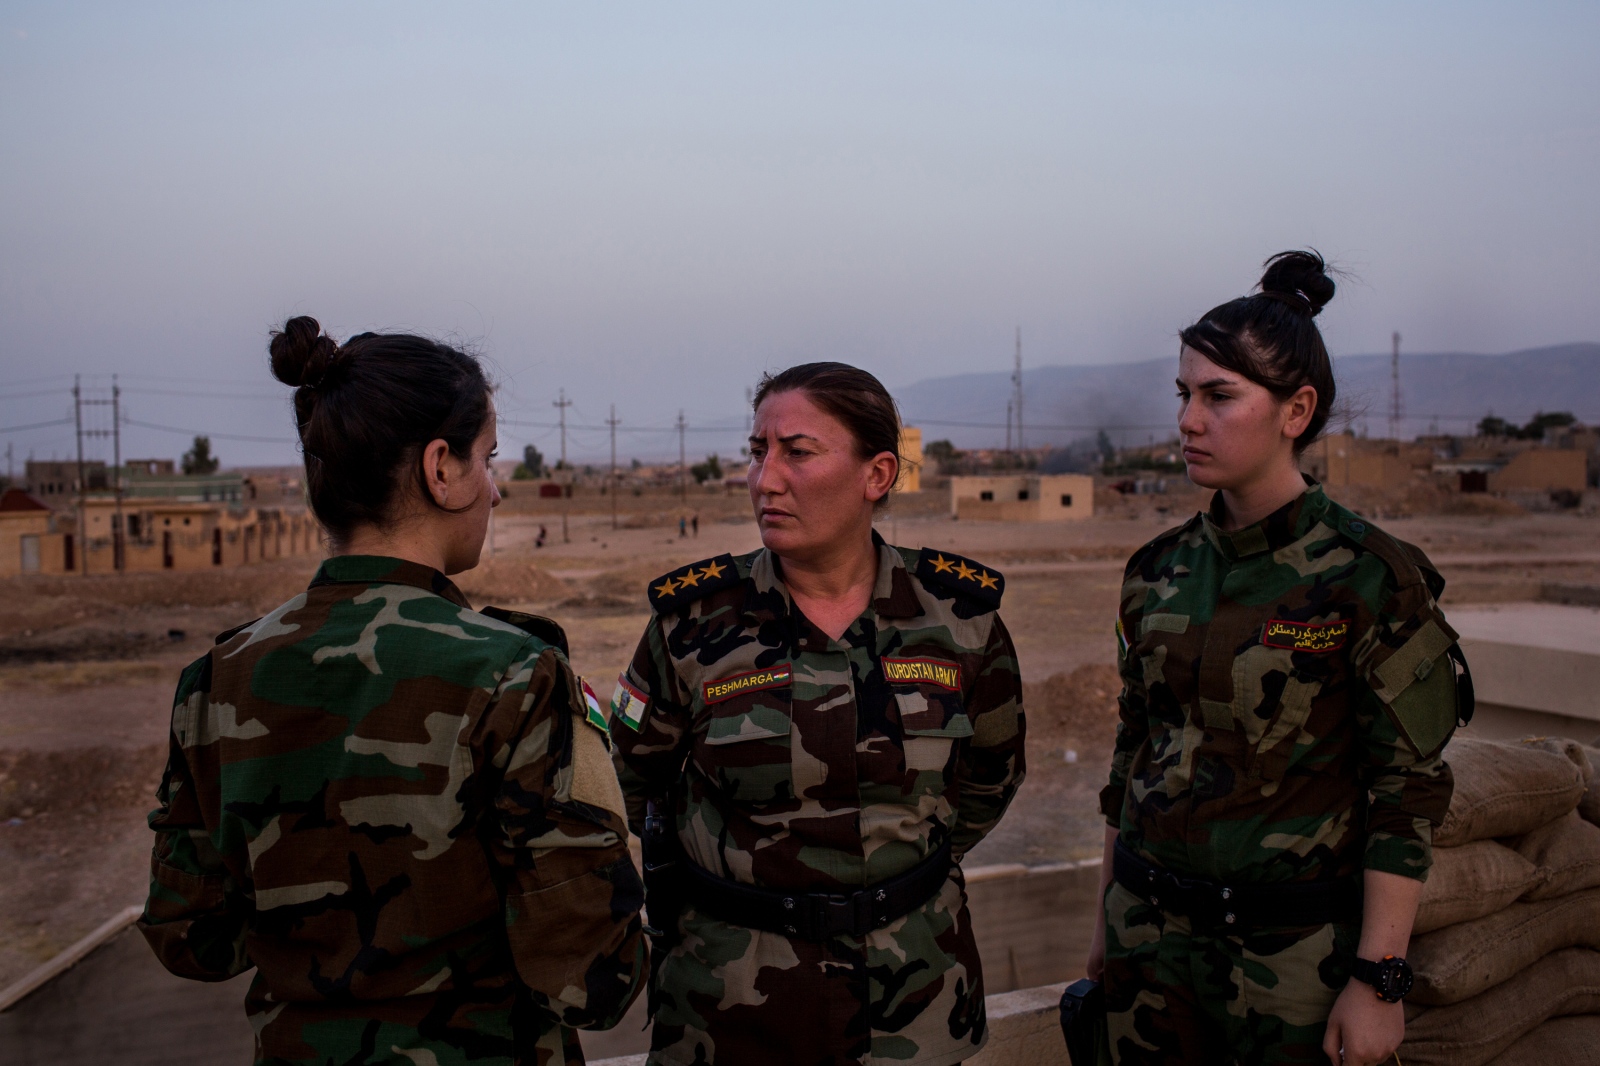 Captain Khatoon Khider, center, speaks to the women in her battalion as they fortify their base...